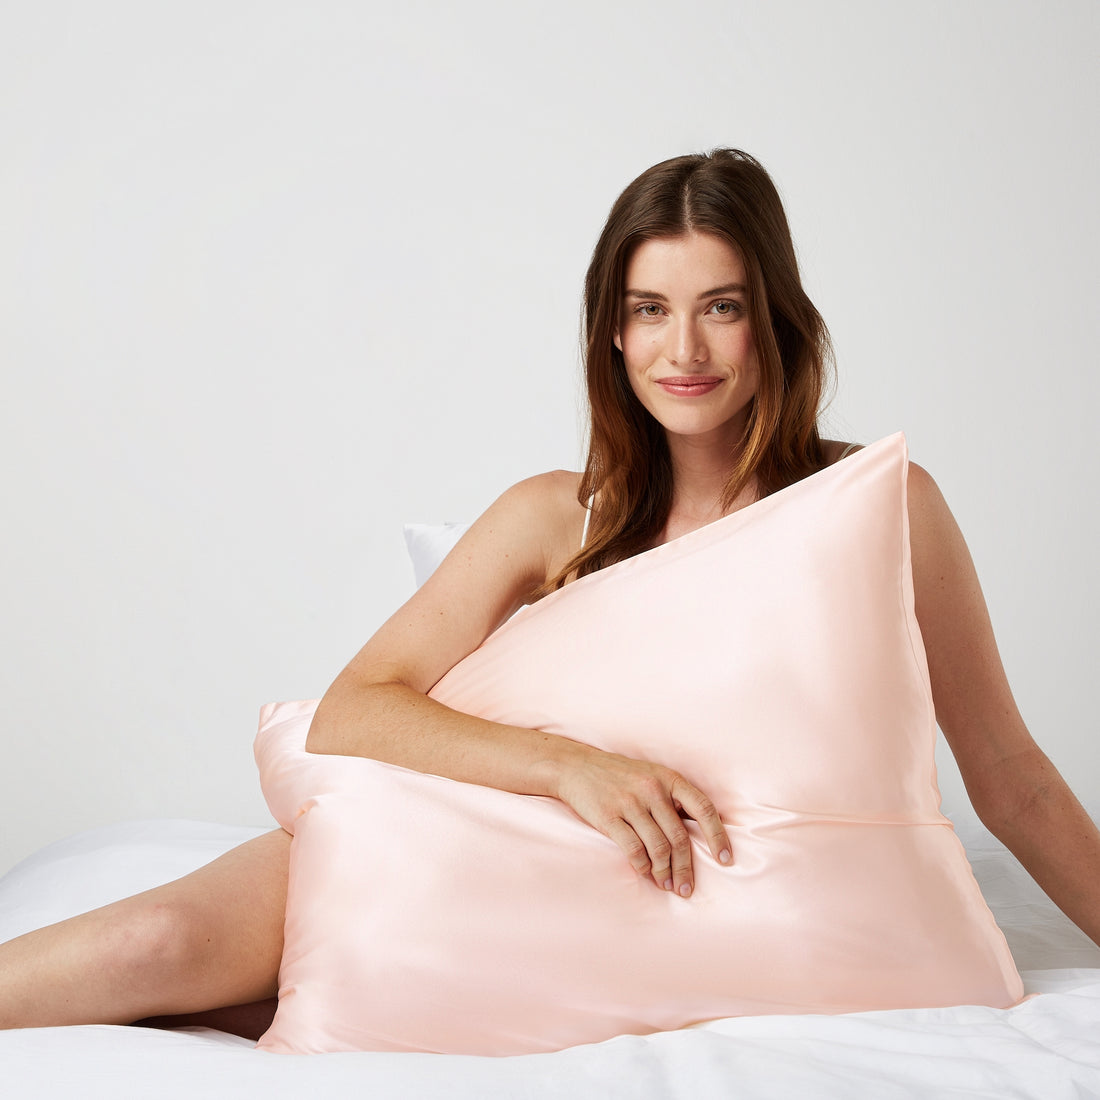 Woman hugging a pillow with a pink pillowcase